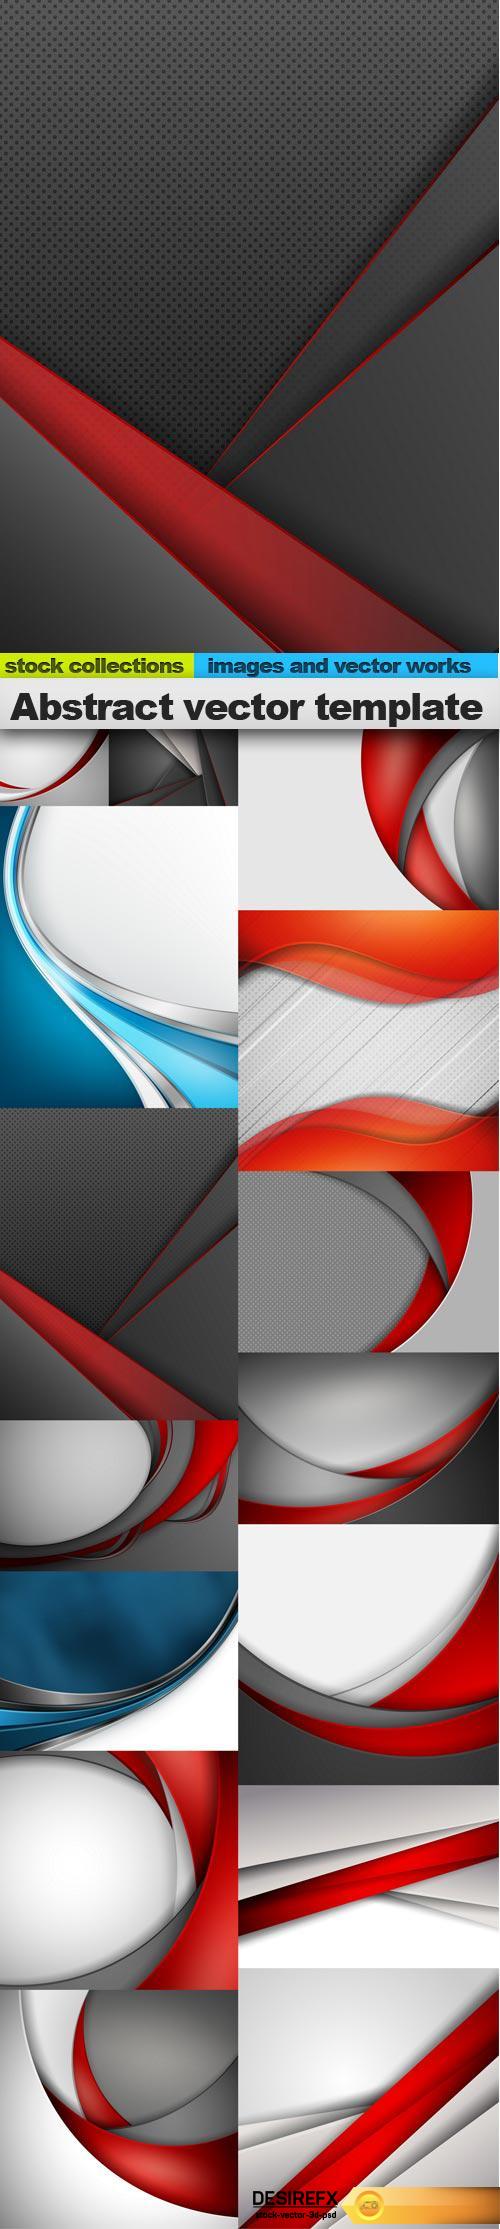 Abstract vector template, 15 x EPS